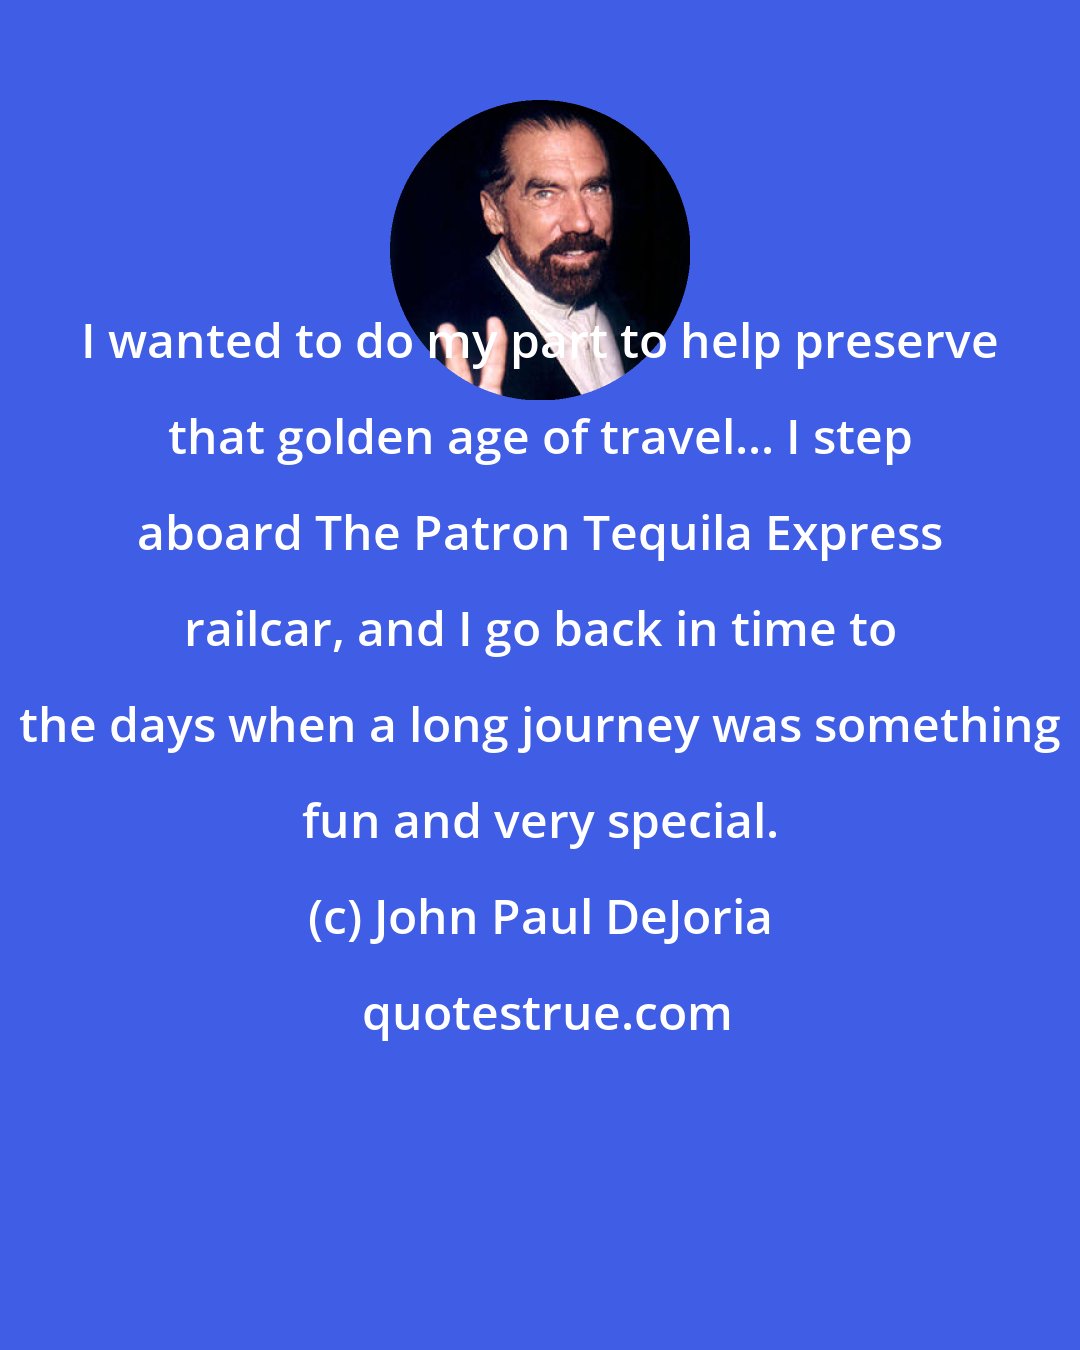 John Paul DeJoria: I wanted to do my part to help preserve that golden age of travel... I step aboard The Patron Tequila Express railcar, and I go back in time to the days when a long journey was something fun and very special.